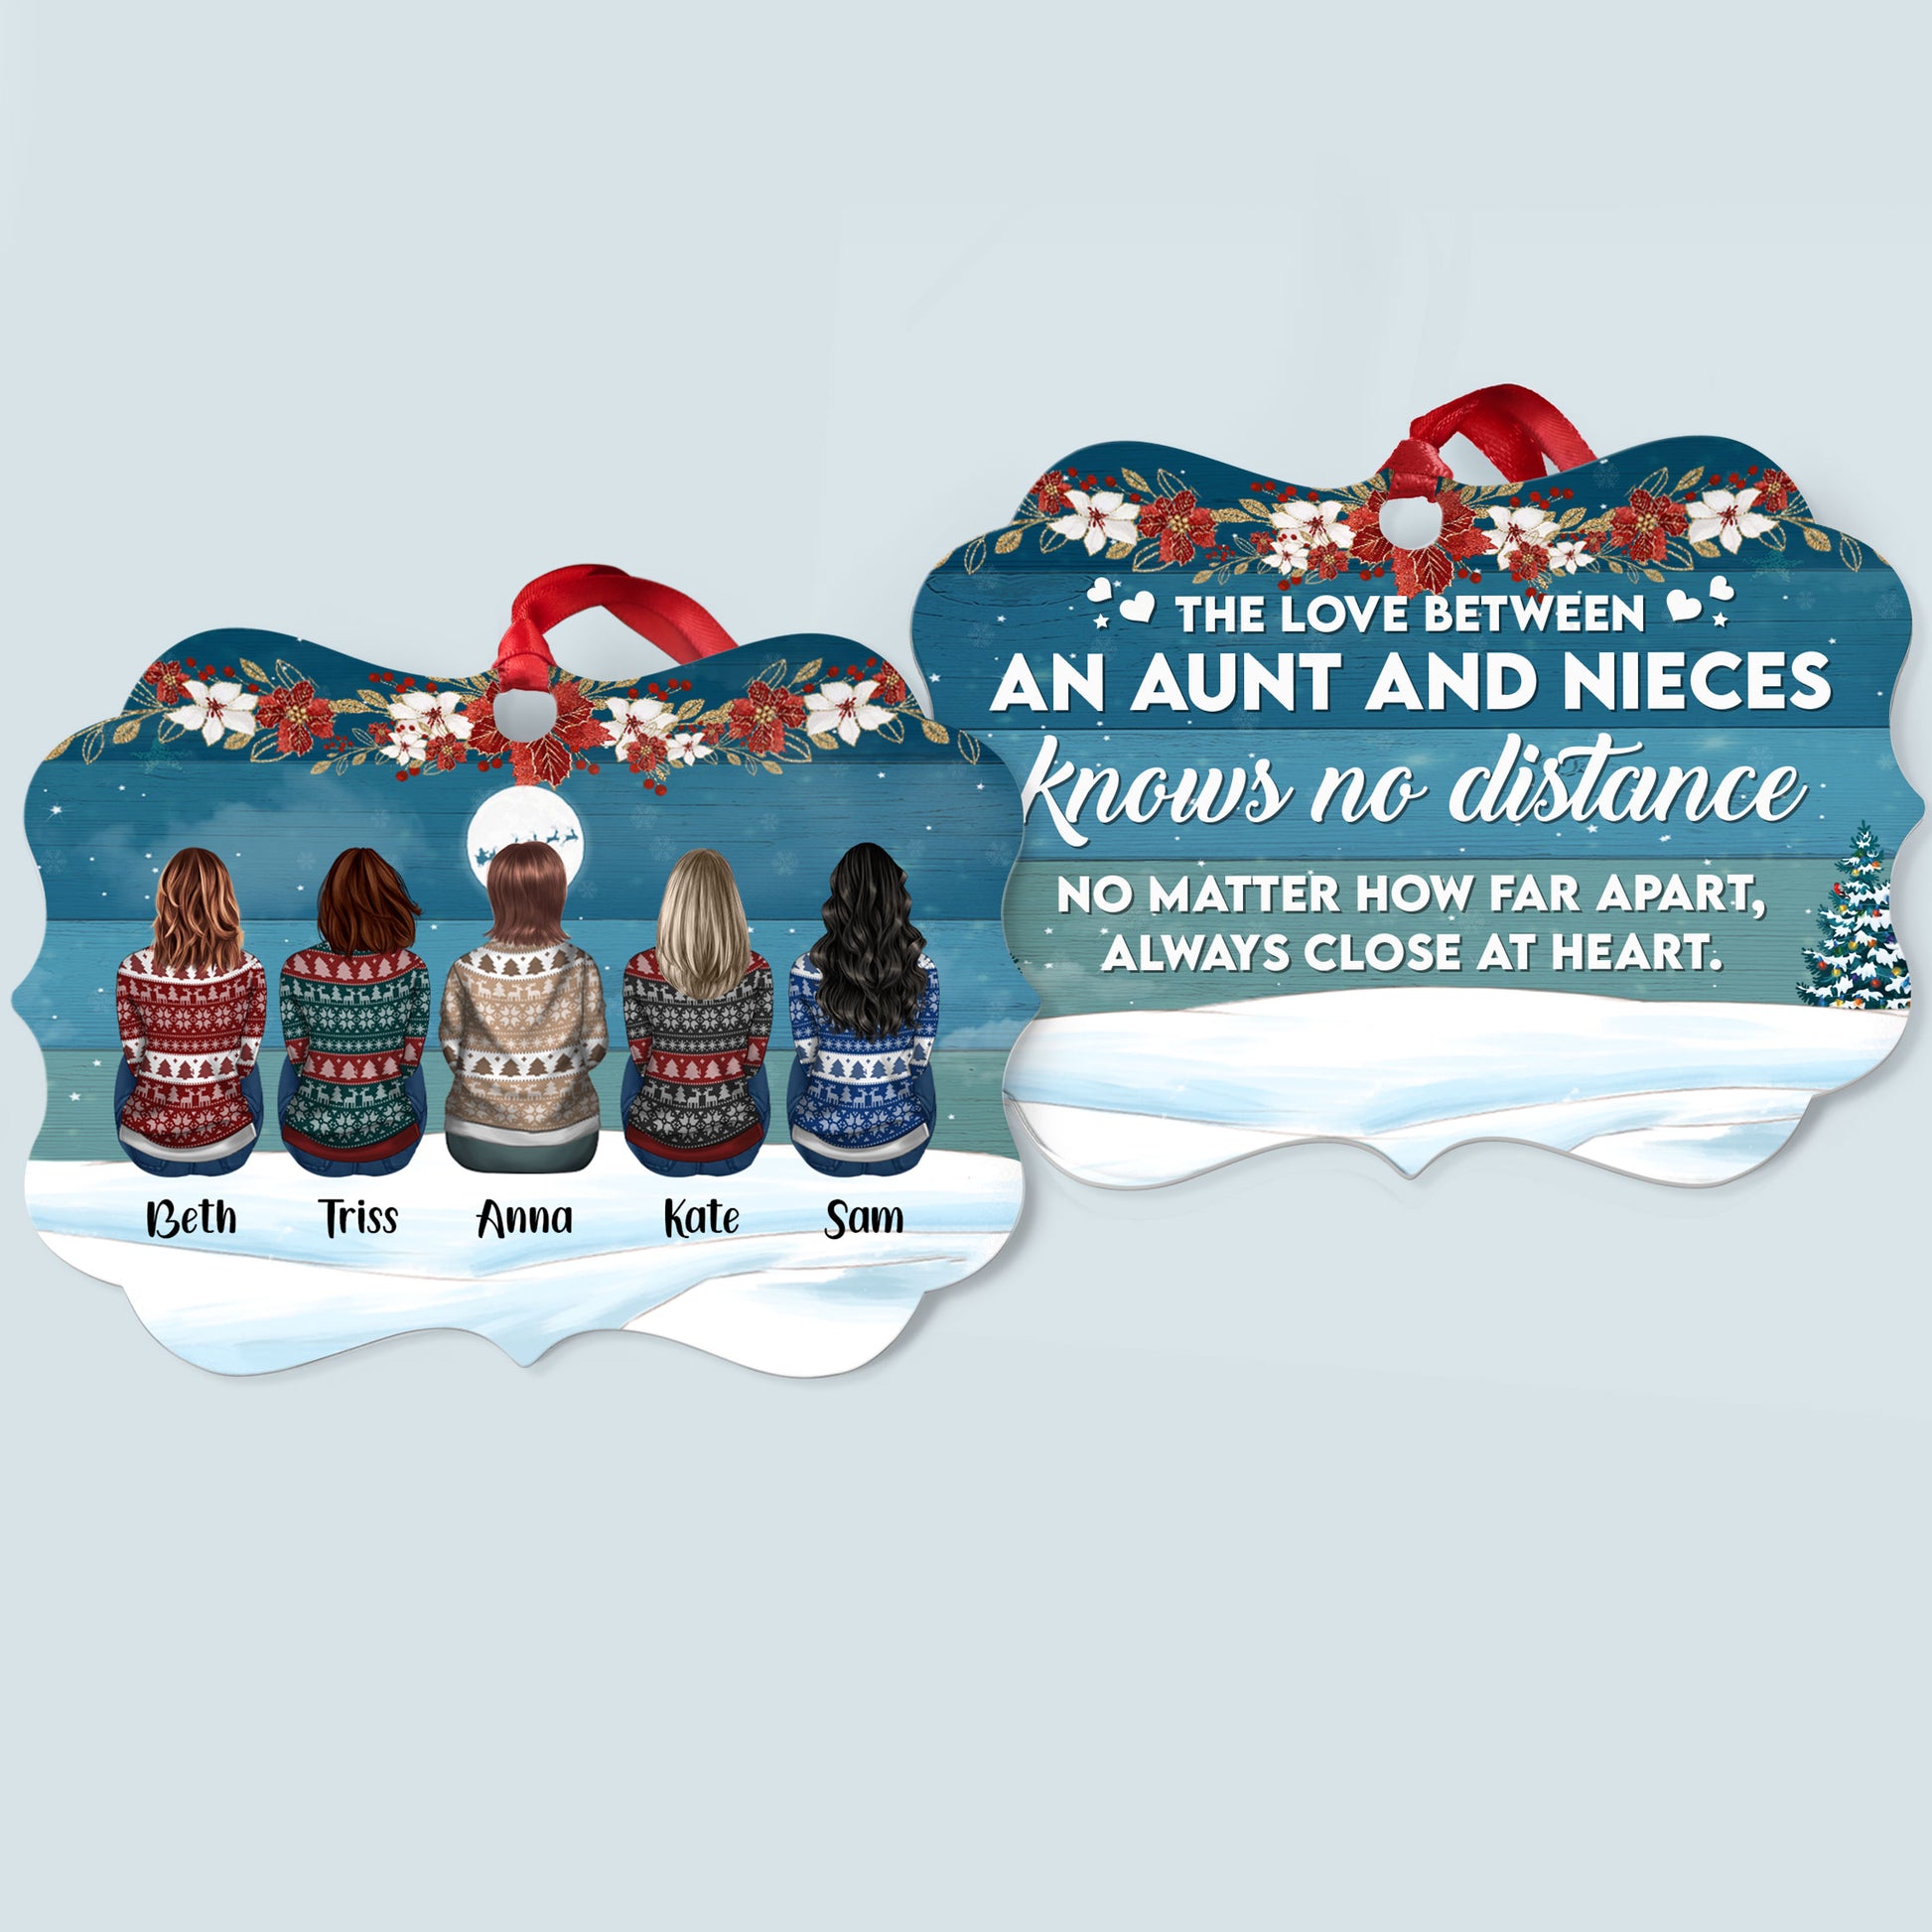 The Love Between Aunt And Niece - Personalized Two-Sided Aluminum Ornament - Christmas Gift For Aunties And Nieces